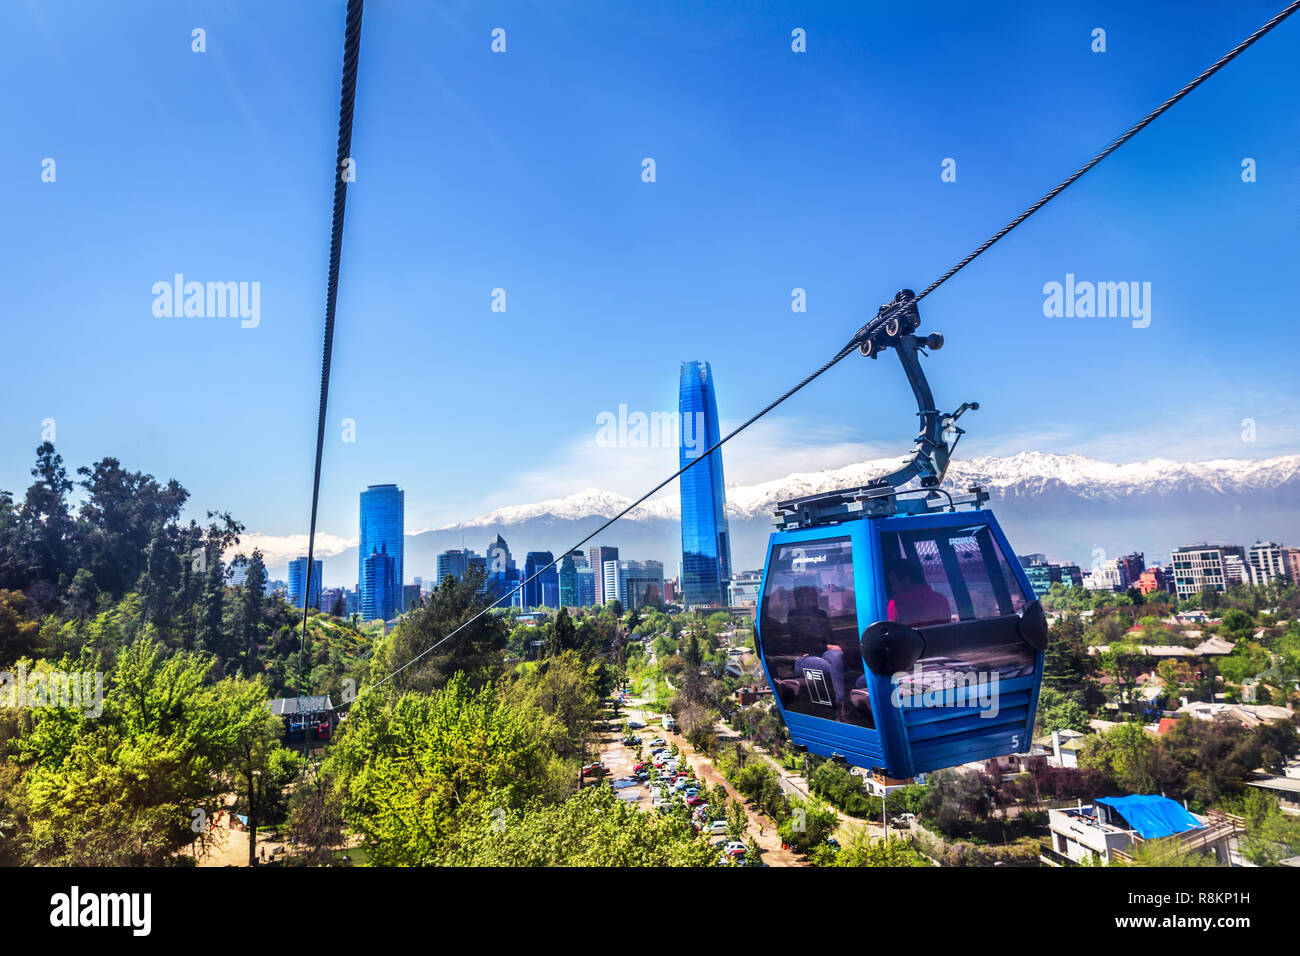 Santiago, Chile - Oct 15th 2017 - The city of Santiago del Chile seen from inside the cable car with the ICC buildings and the Andes with snow in the  Stock Photo